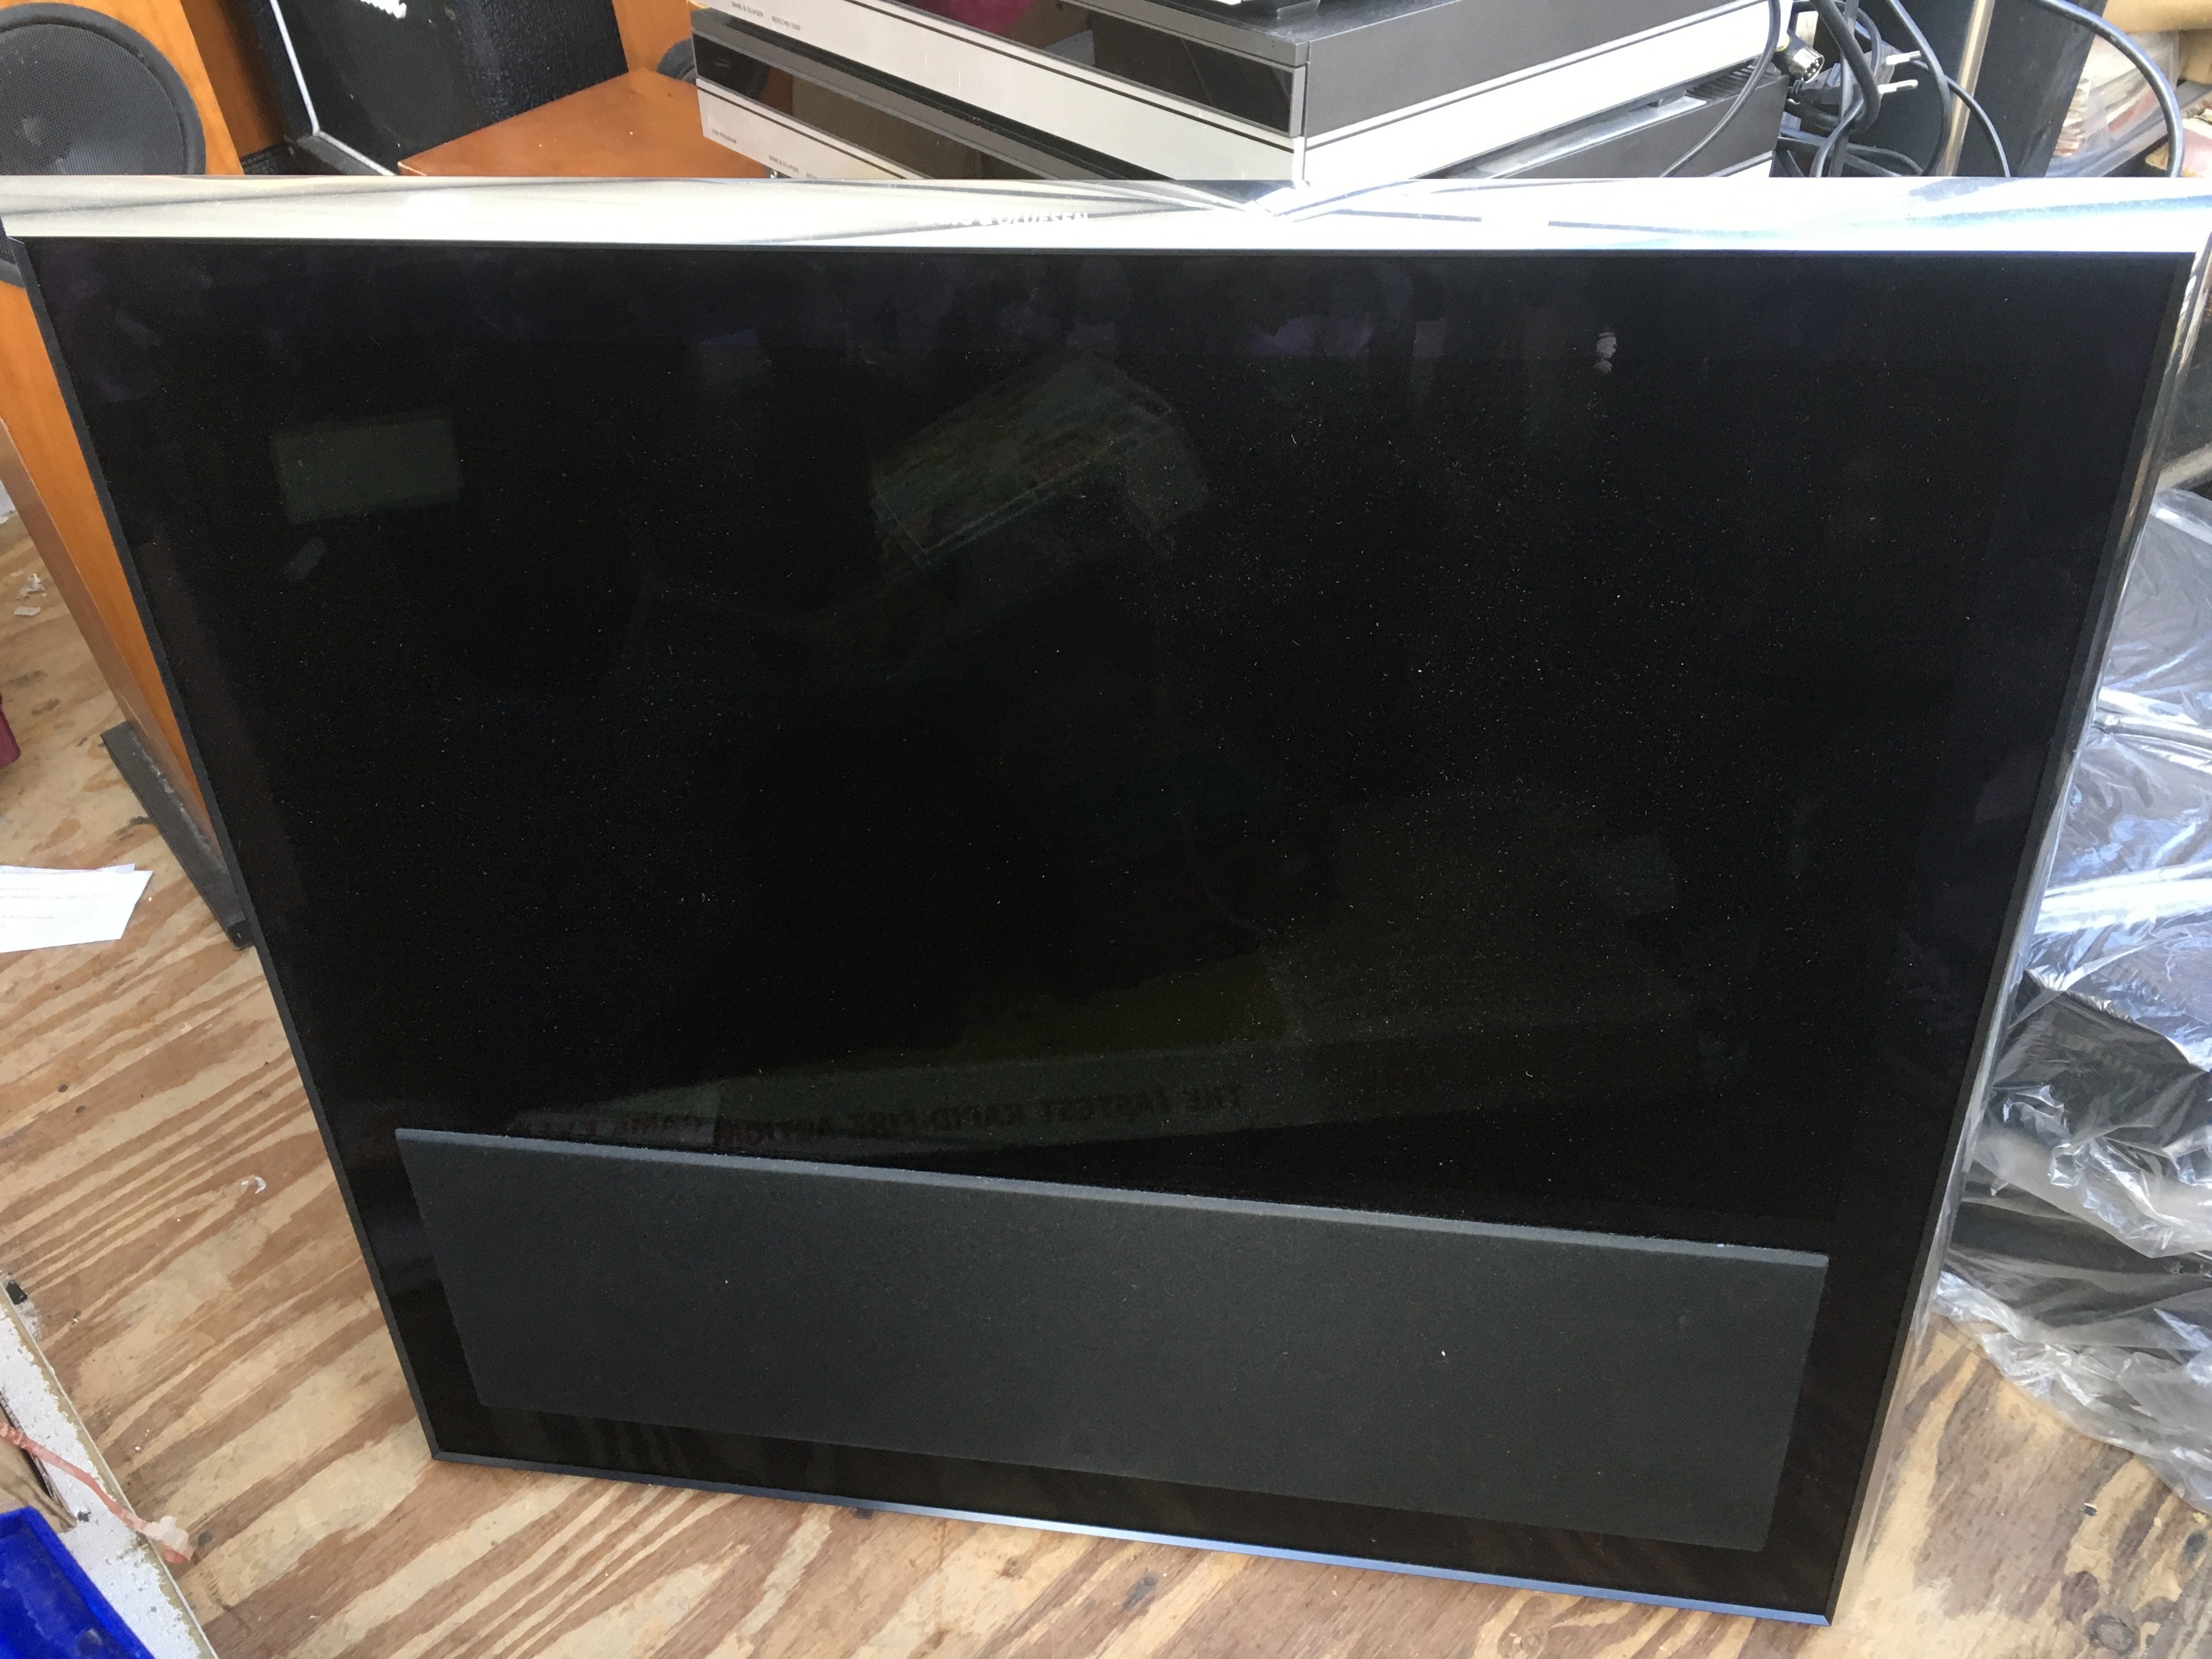 A Bang & Olufsen TV with master control panel 5500